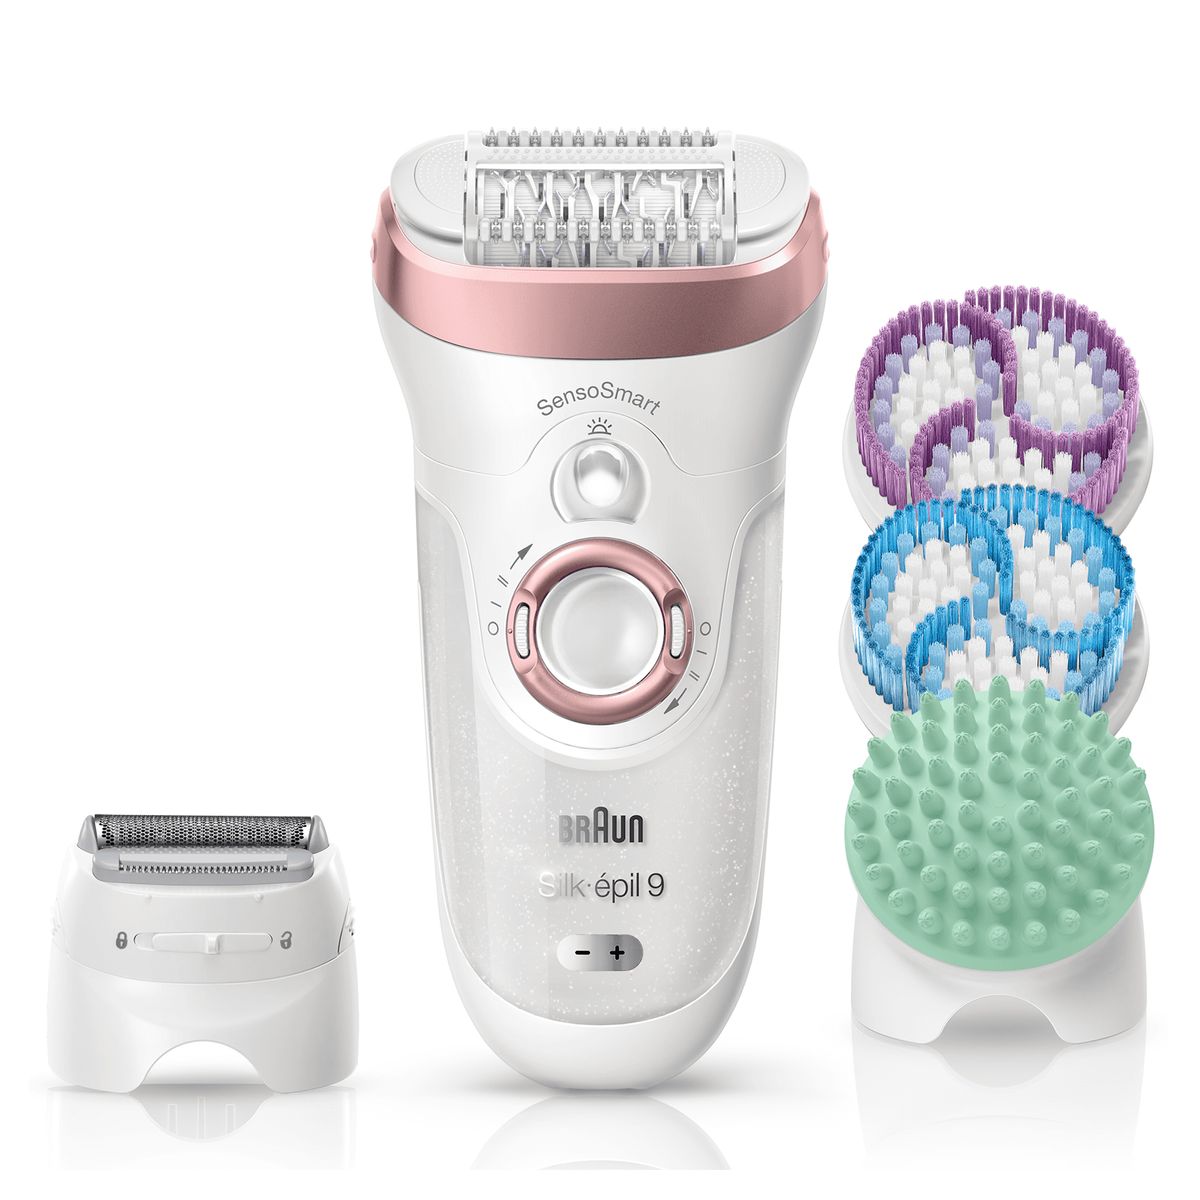 Braun Silk-epil 9 beauty set epilator ladies for hair removal attachments for shaver exfoliation massage for body 9-990 rose/gold single